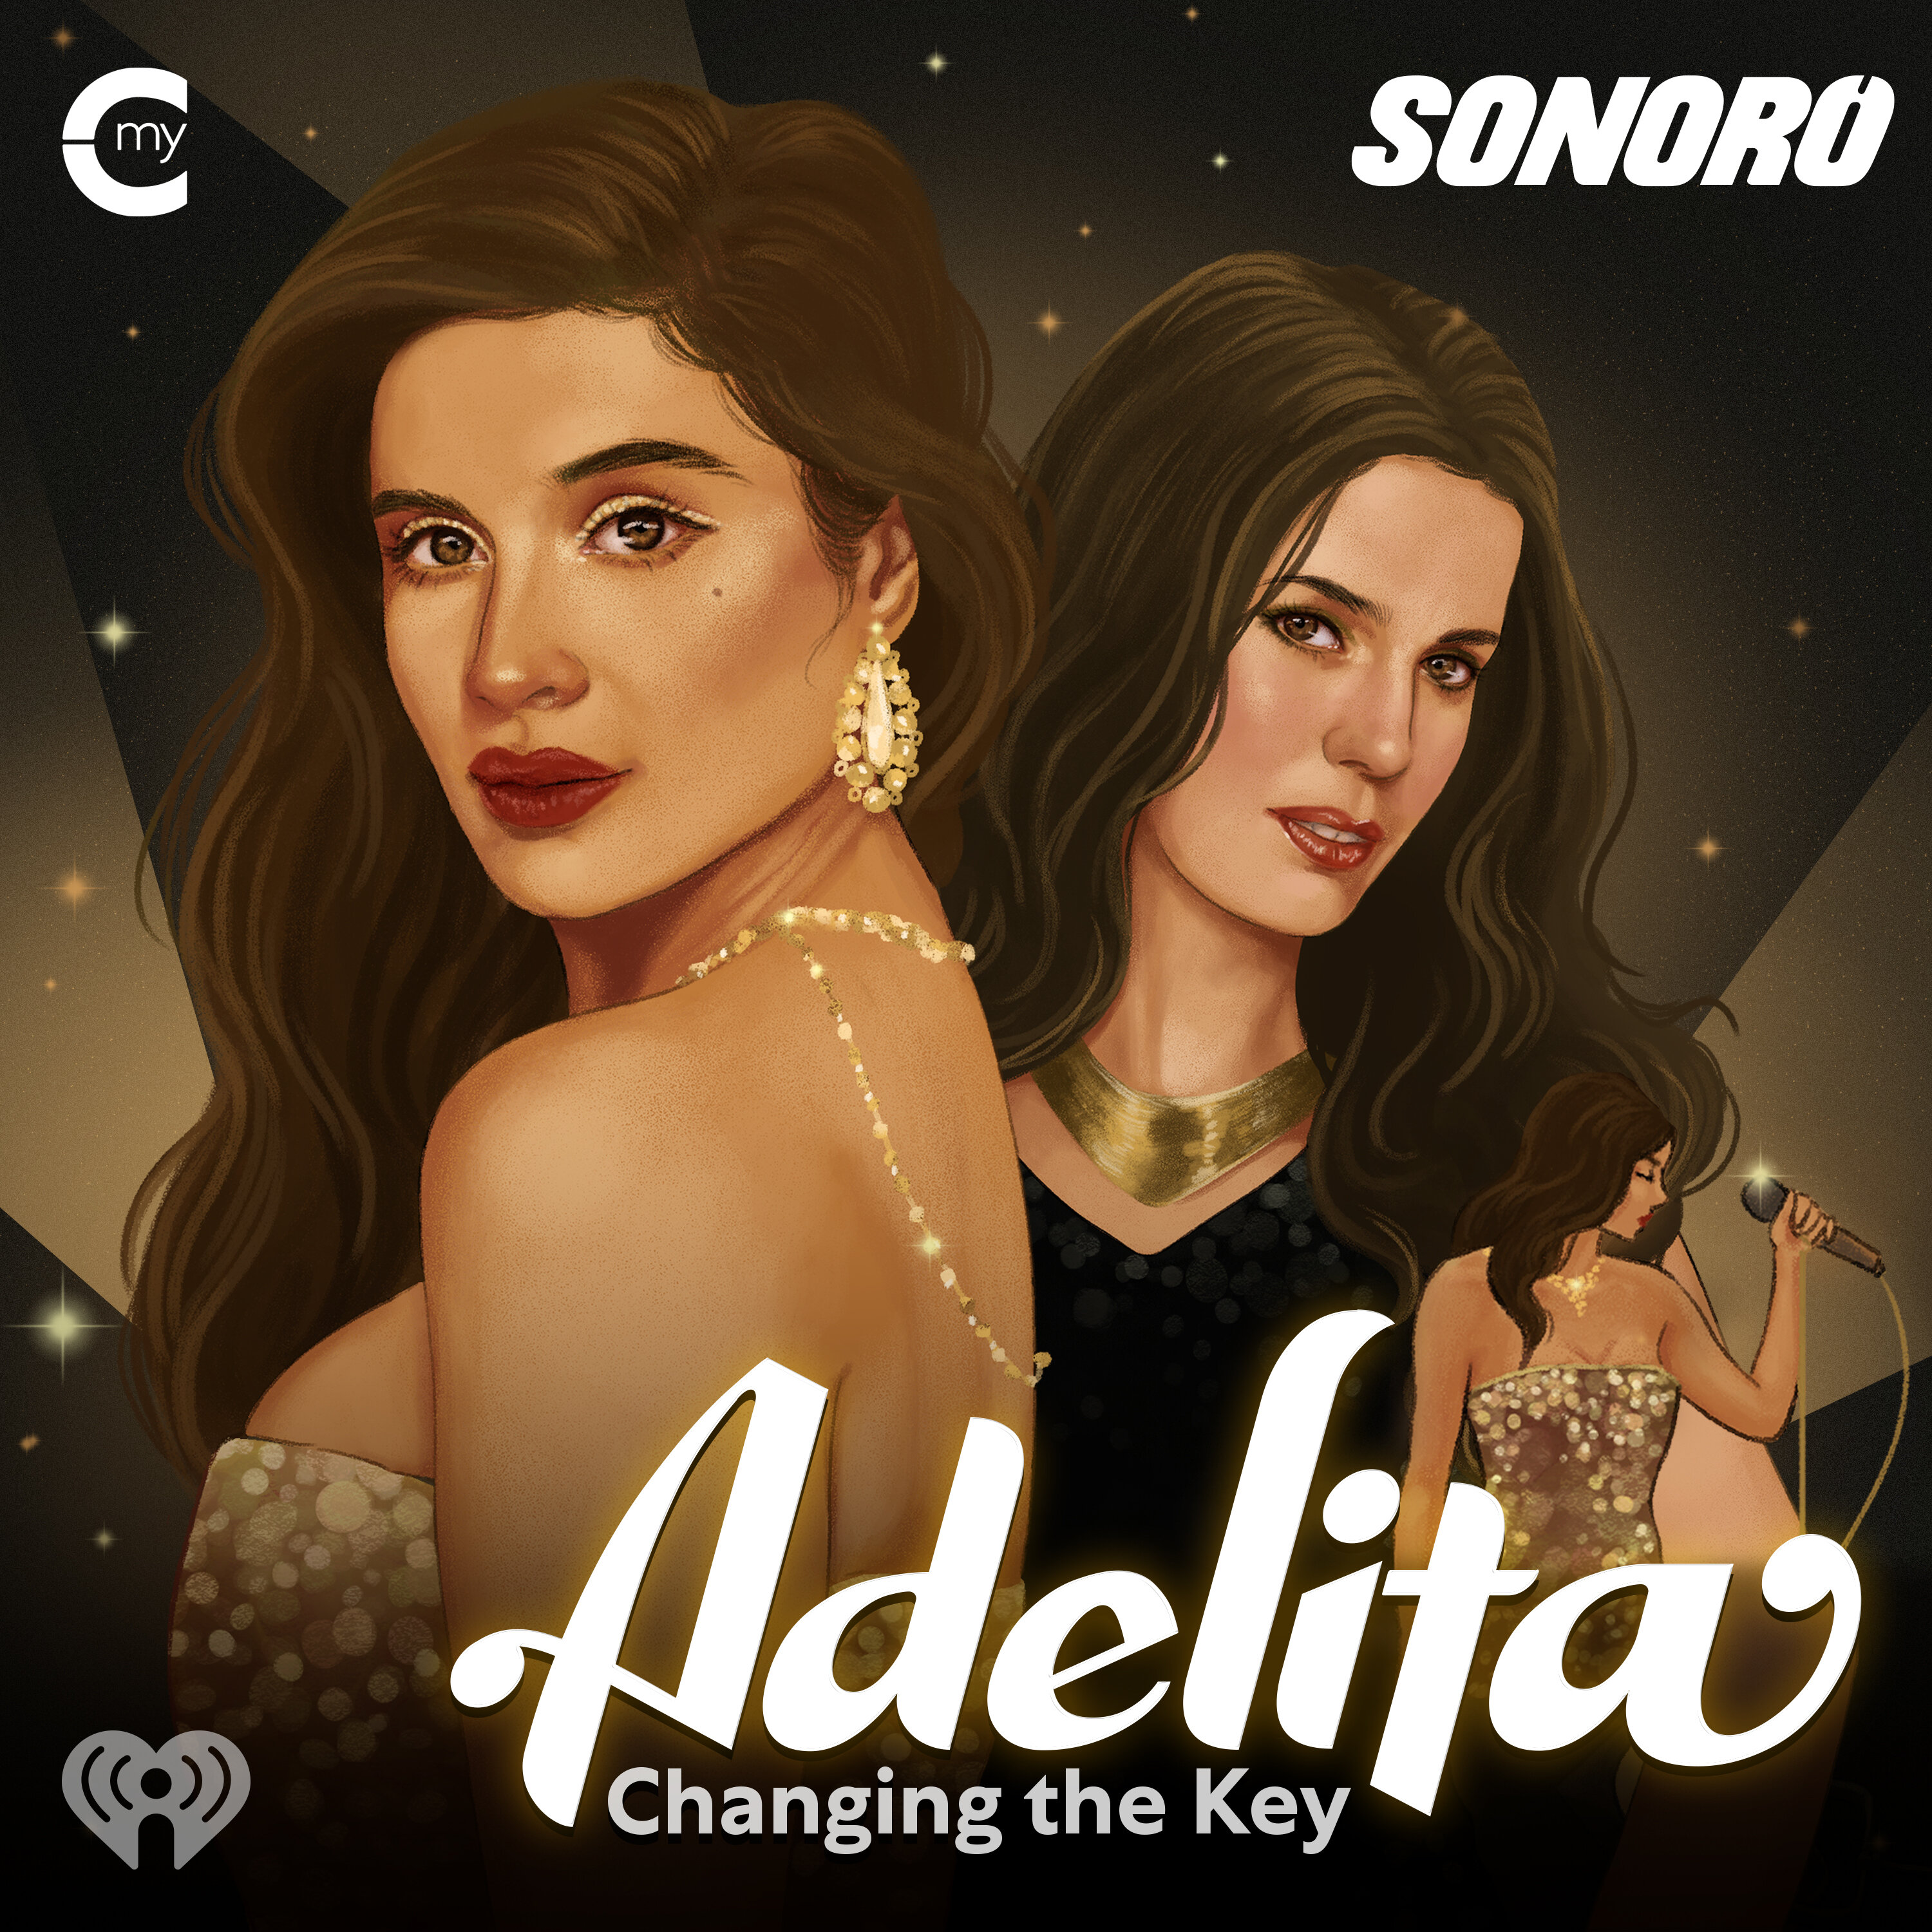 Ep 21 - Adelita: Changing The Key : "The Producers"